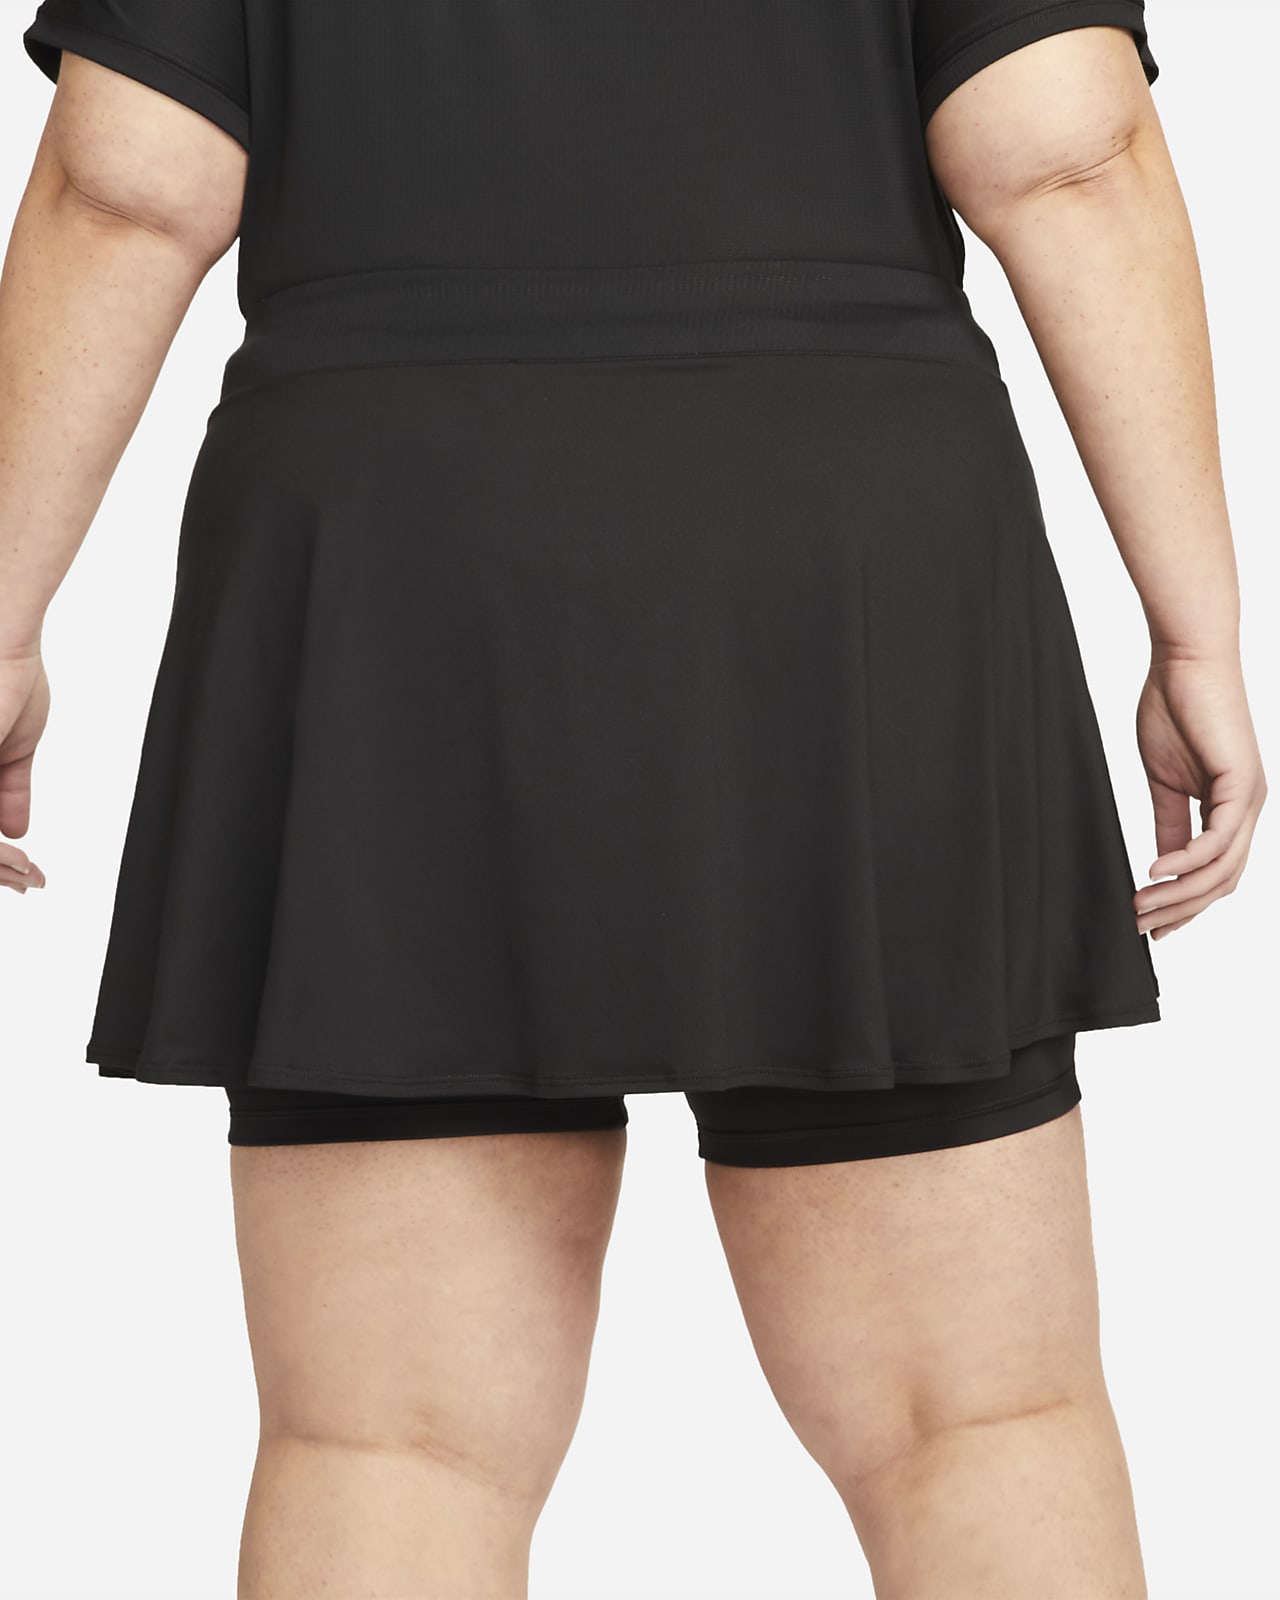 RQYYD Clearance Plus Size Skirt with Leggings for Women Tennis